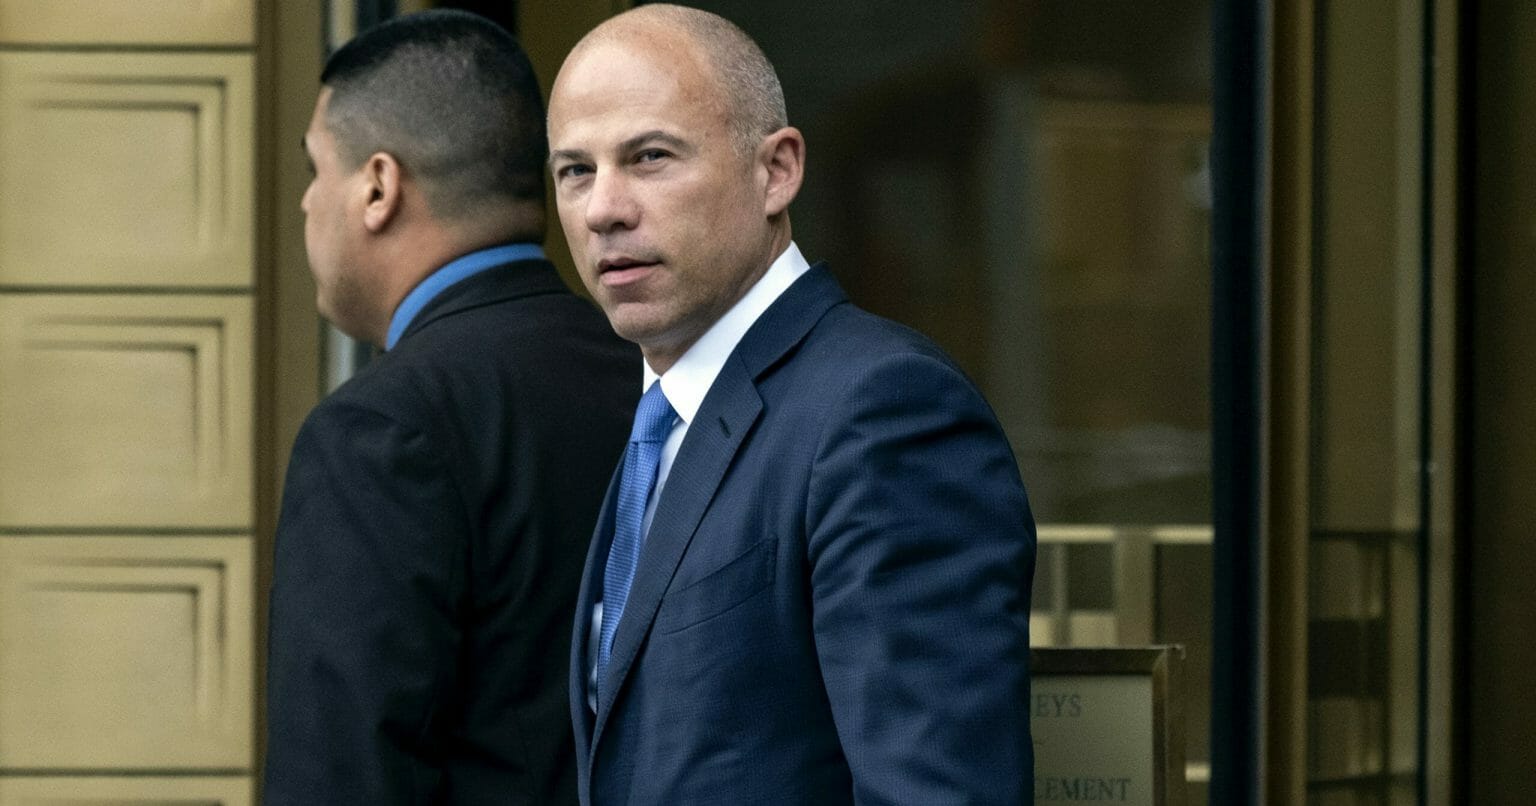 Michael Avenatti Convicted of Attempted Extortion and Fraud, Faces Up